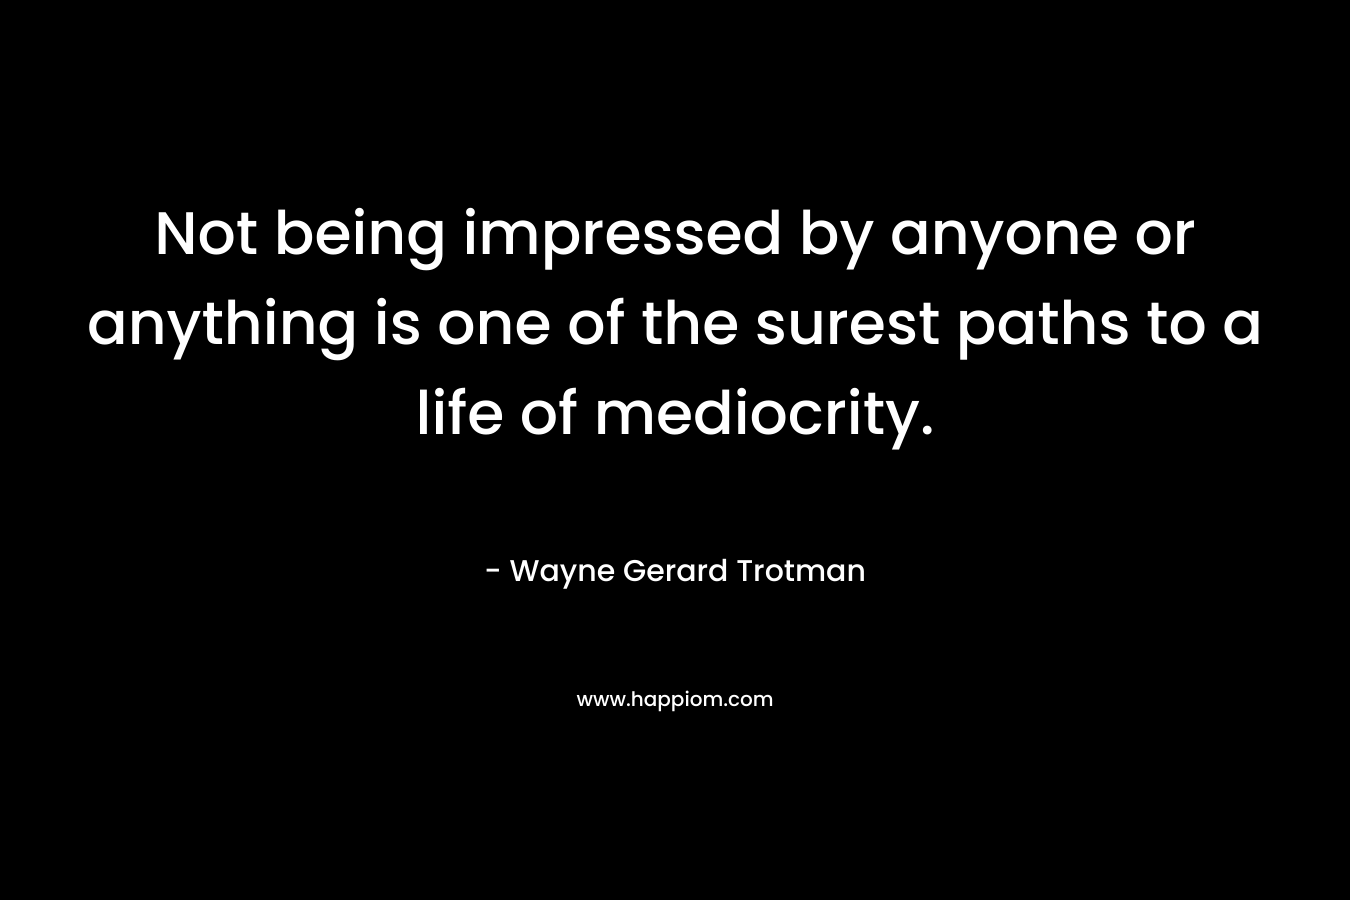 Not being impressed by anyone or anything is one of the surest paths to a life of mediocrity.